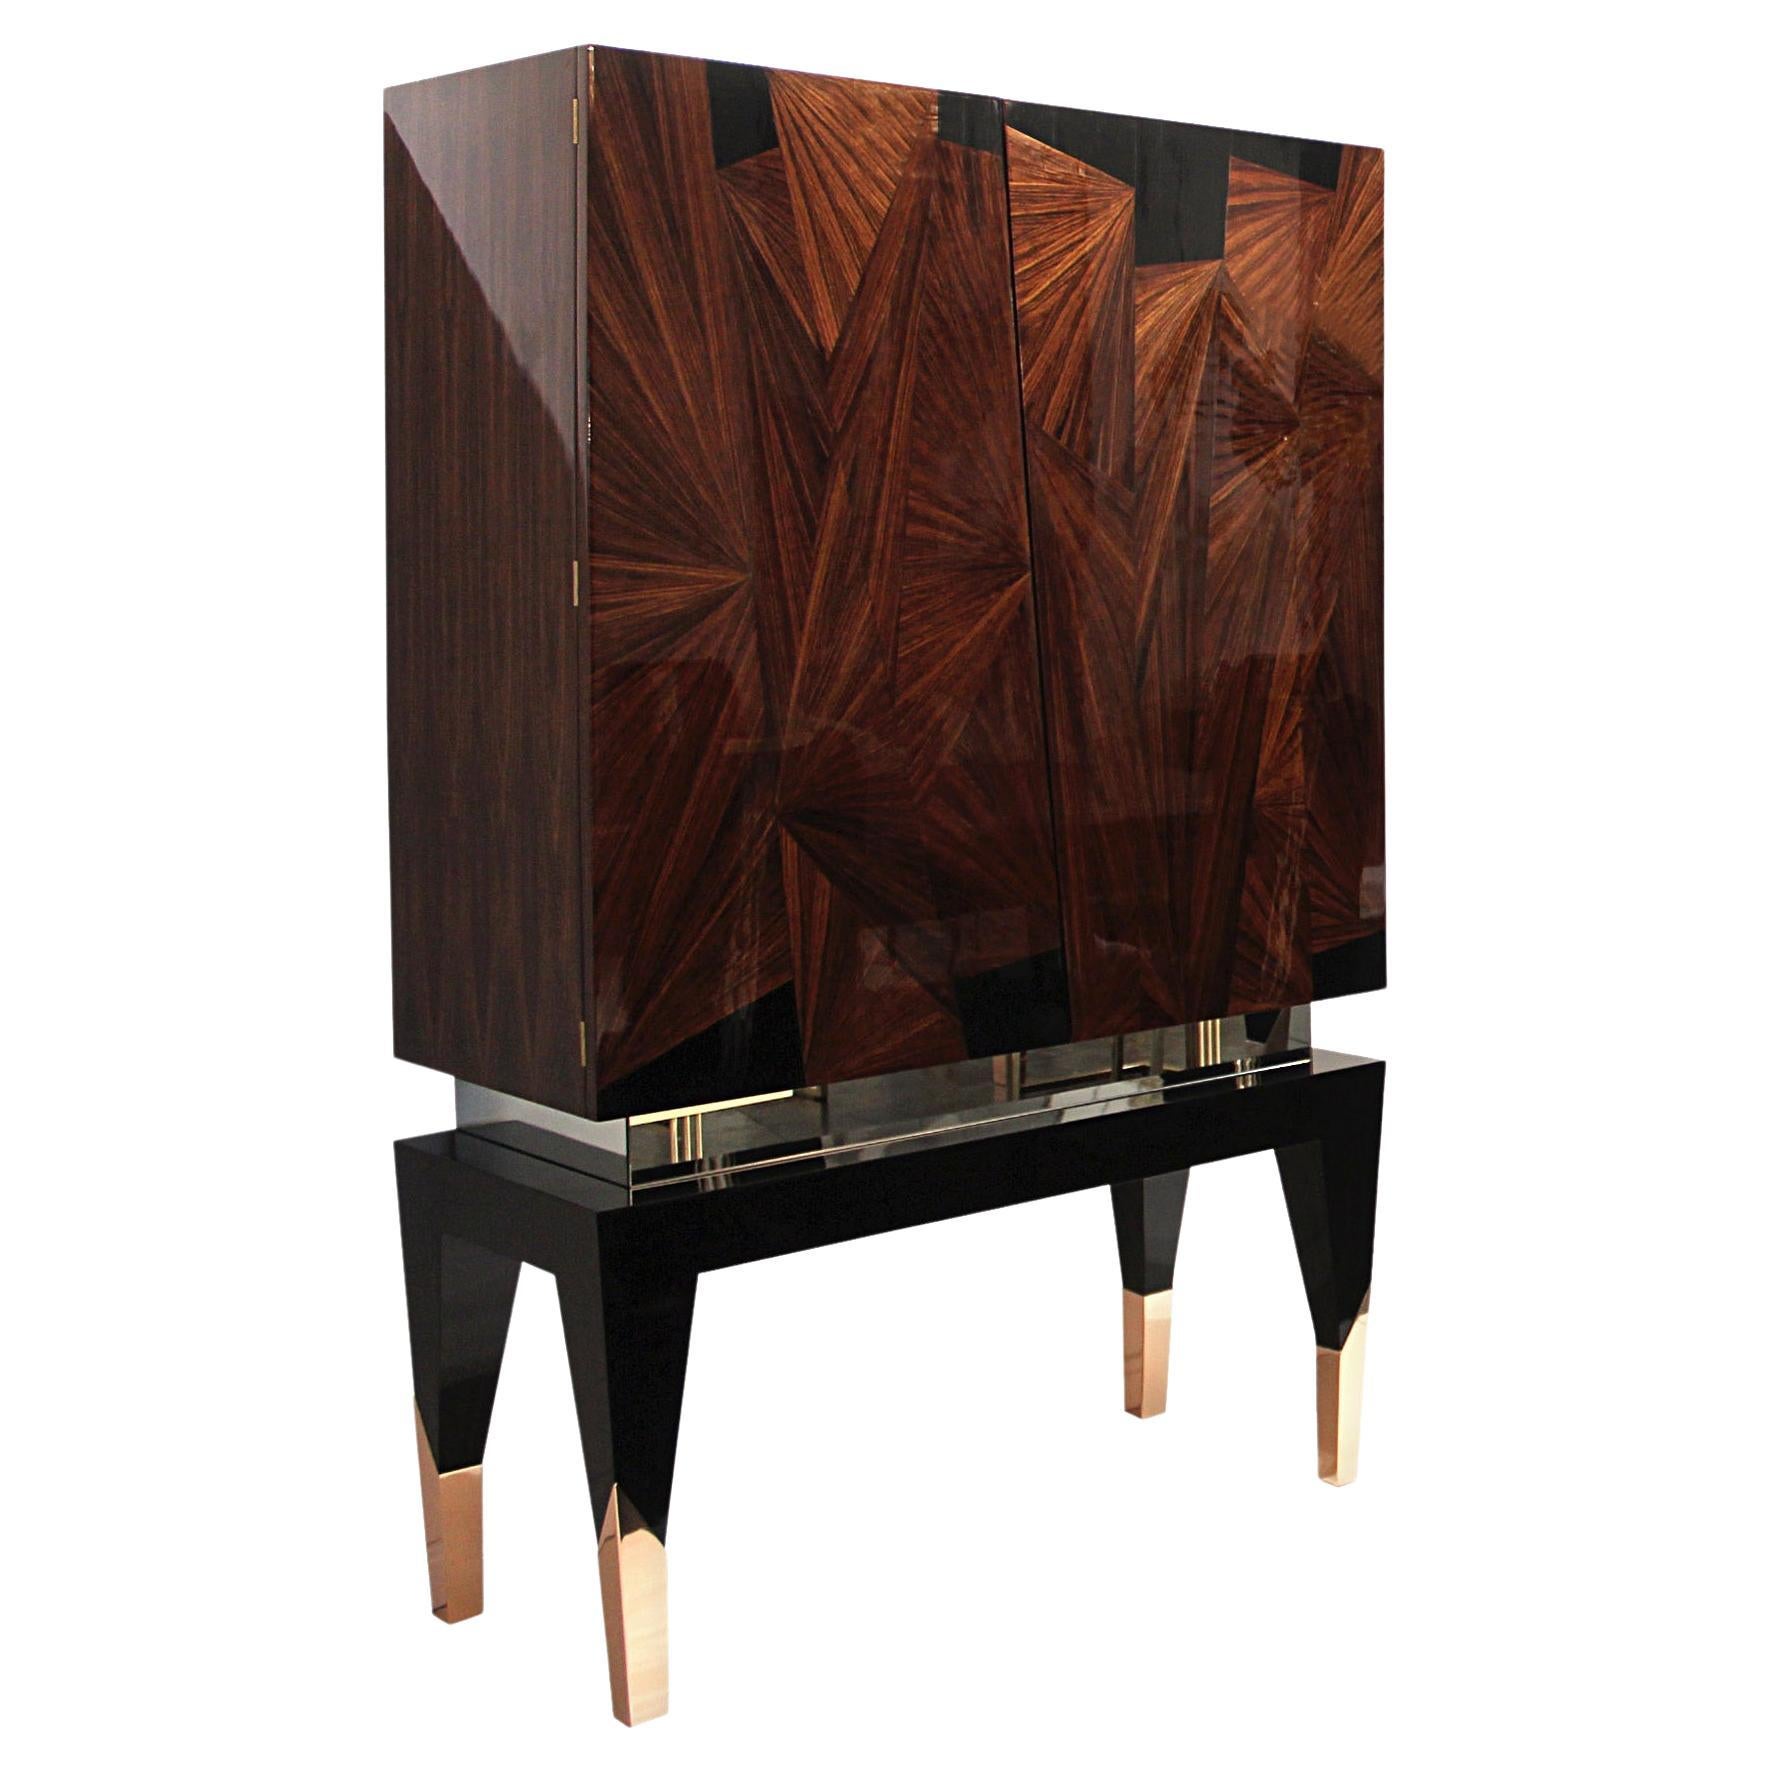 21st Century Frida Cabinet, Rosewood and Ash Inlay, Made in Italy by Hebanon